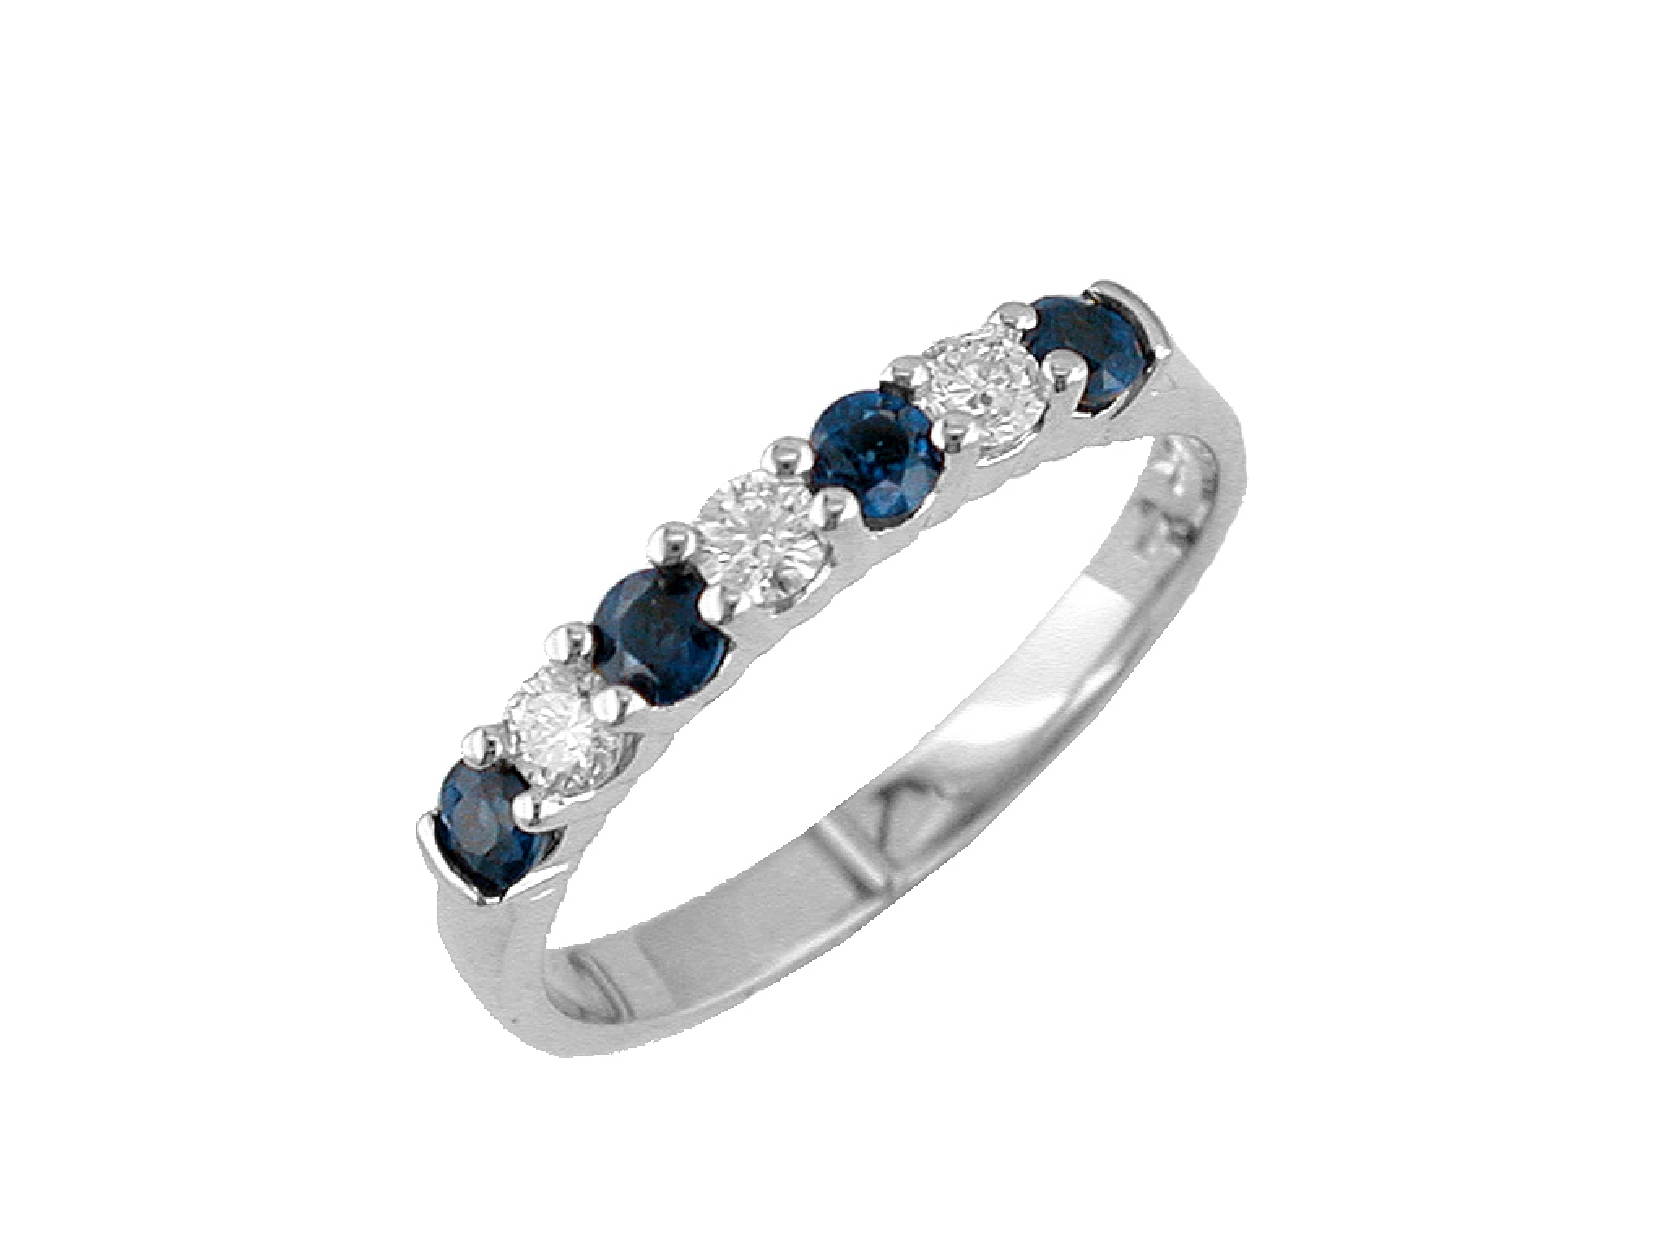 14K White Gold Tri-Sapphire Ring with Overlapping X Style Diamond Accents 
Size 7.5 .04CT Diamonds .55CT Sapphires 
WC4335S